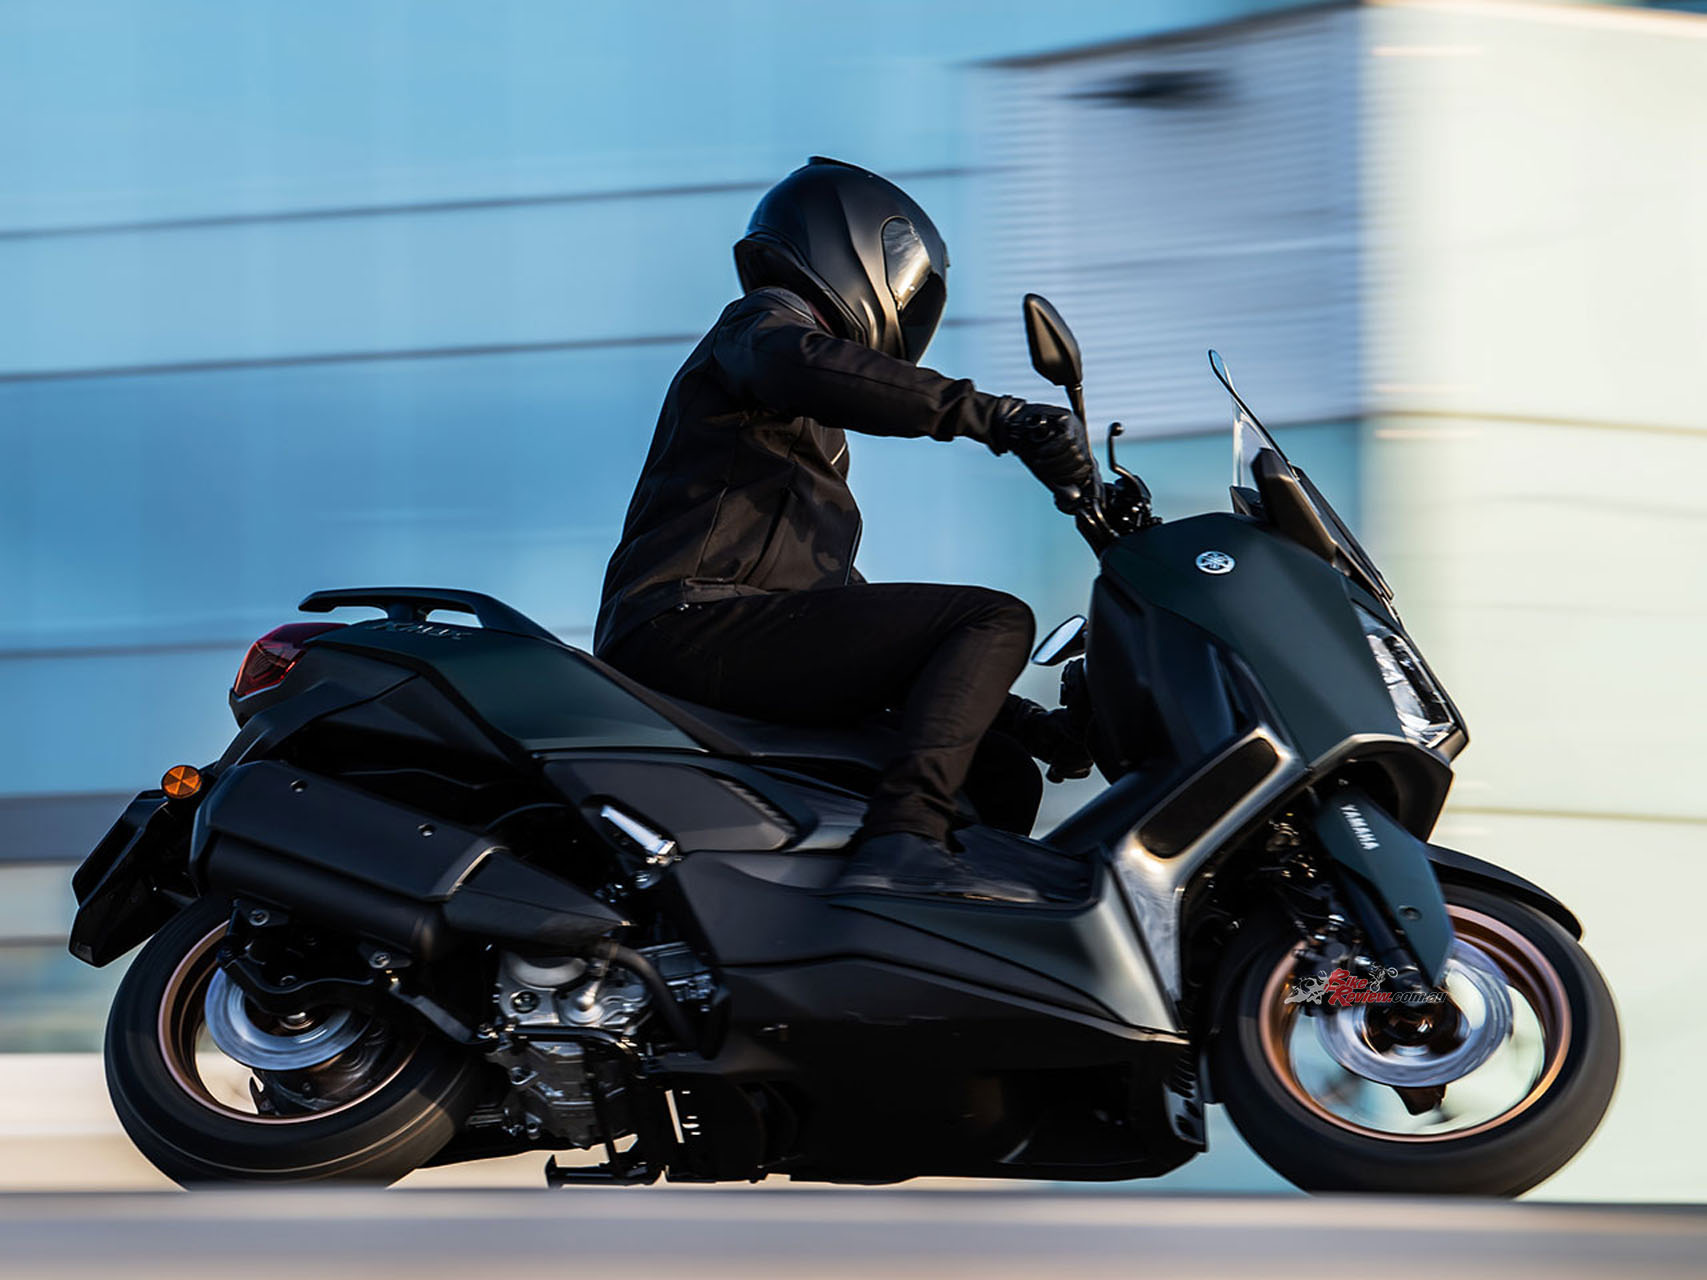 The all-new front fairing is complemented by a new side profile that features a much more condensed and athletic look.